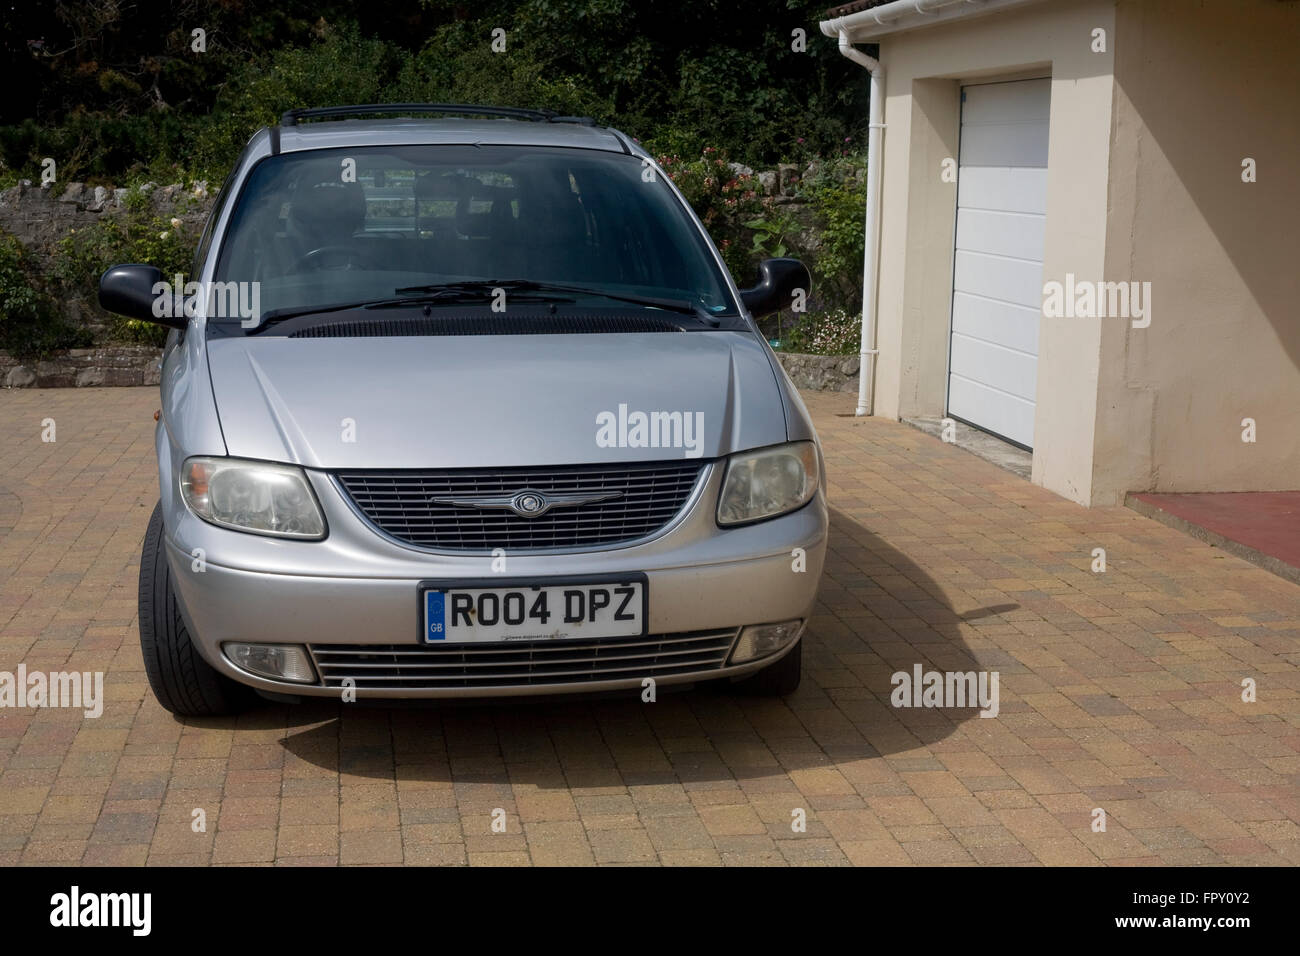 Silver Chrysler grand voyager mpv people carrier parked on block paved drive near garage Stock Photo